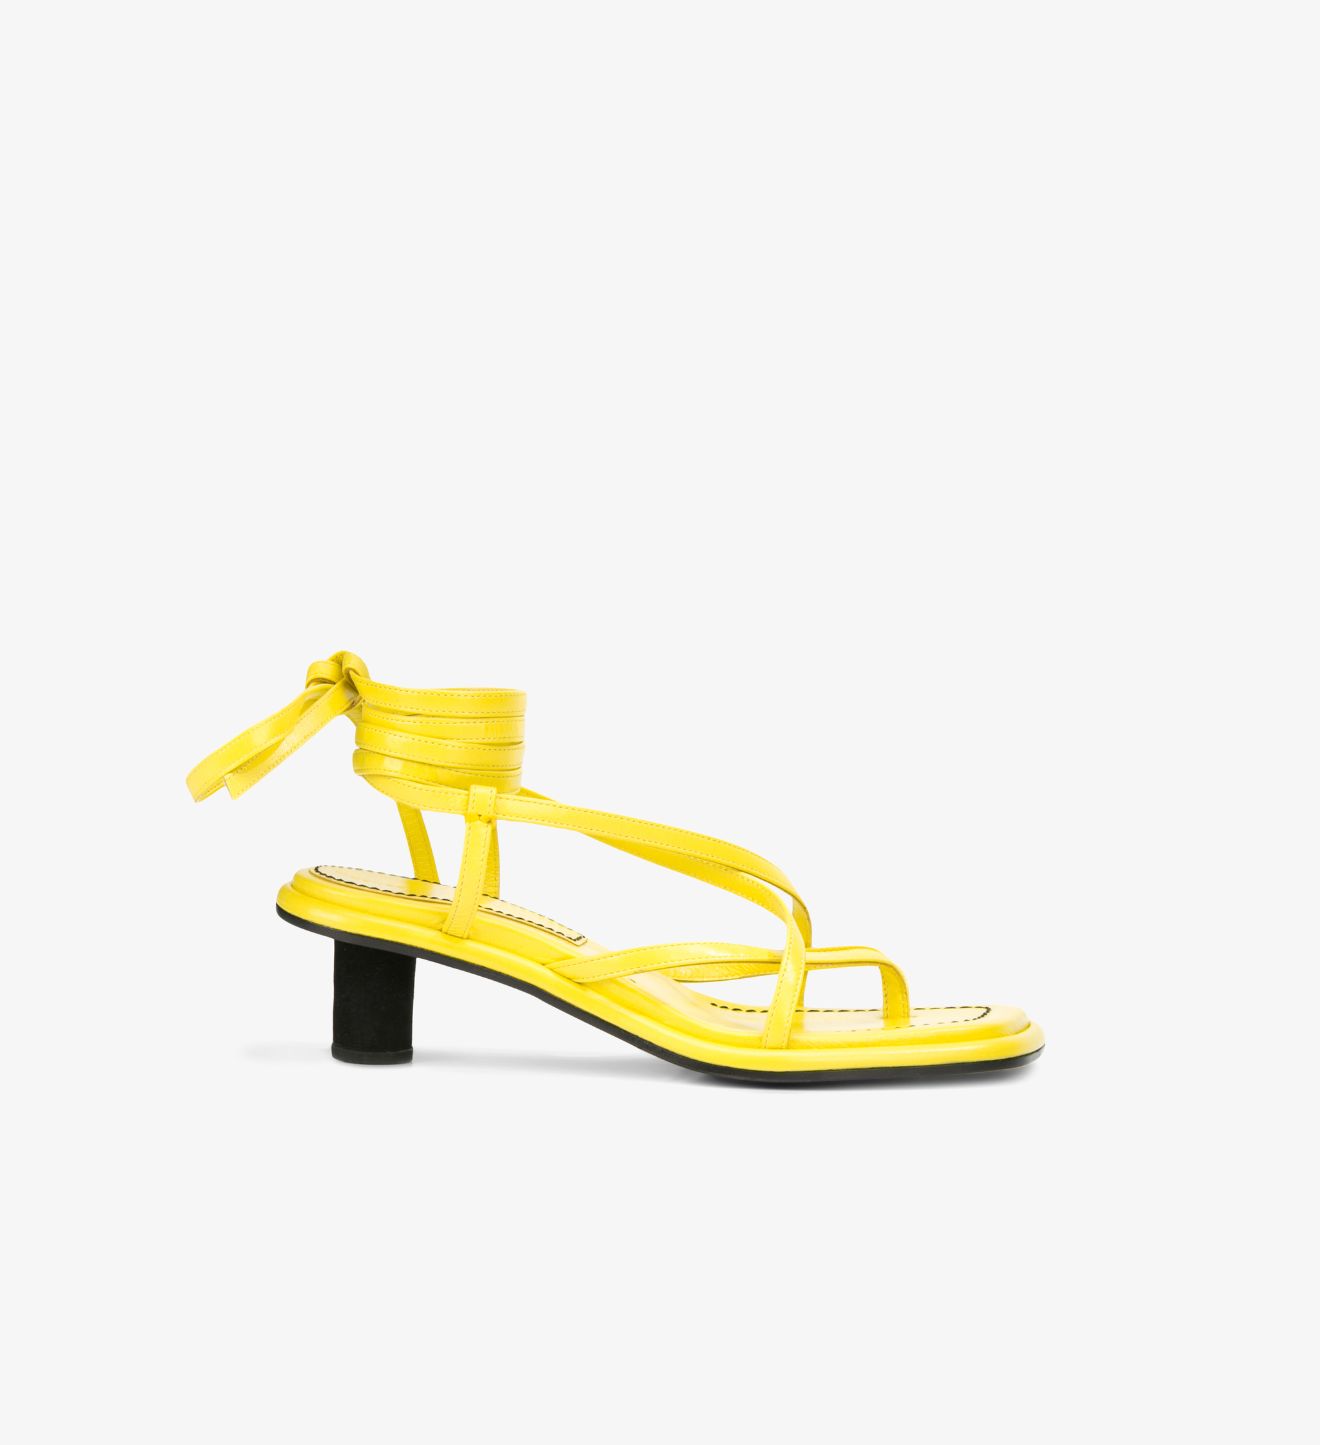 strappy mid heel shoes